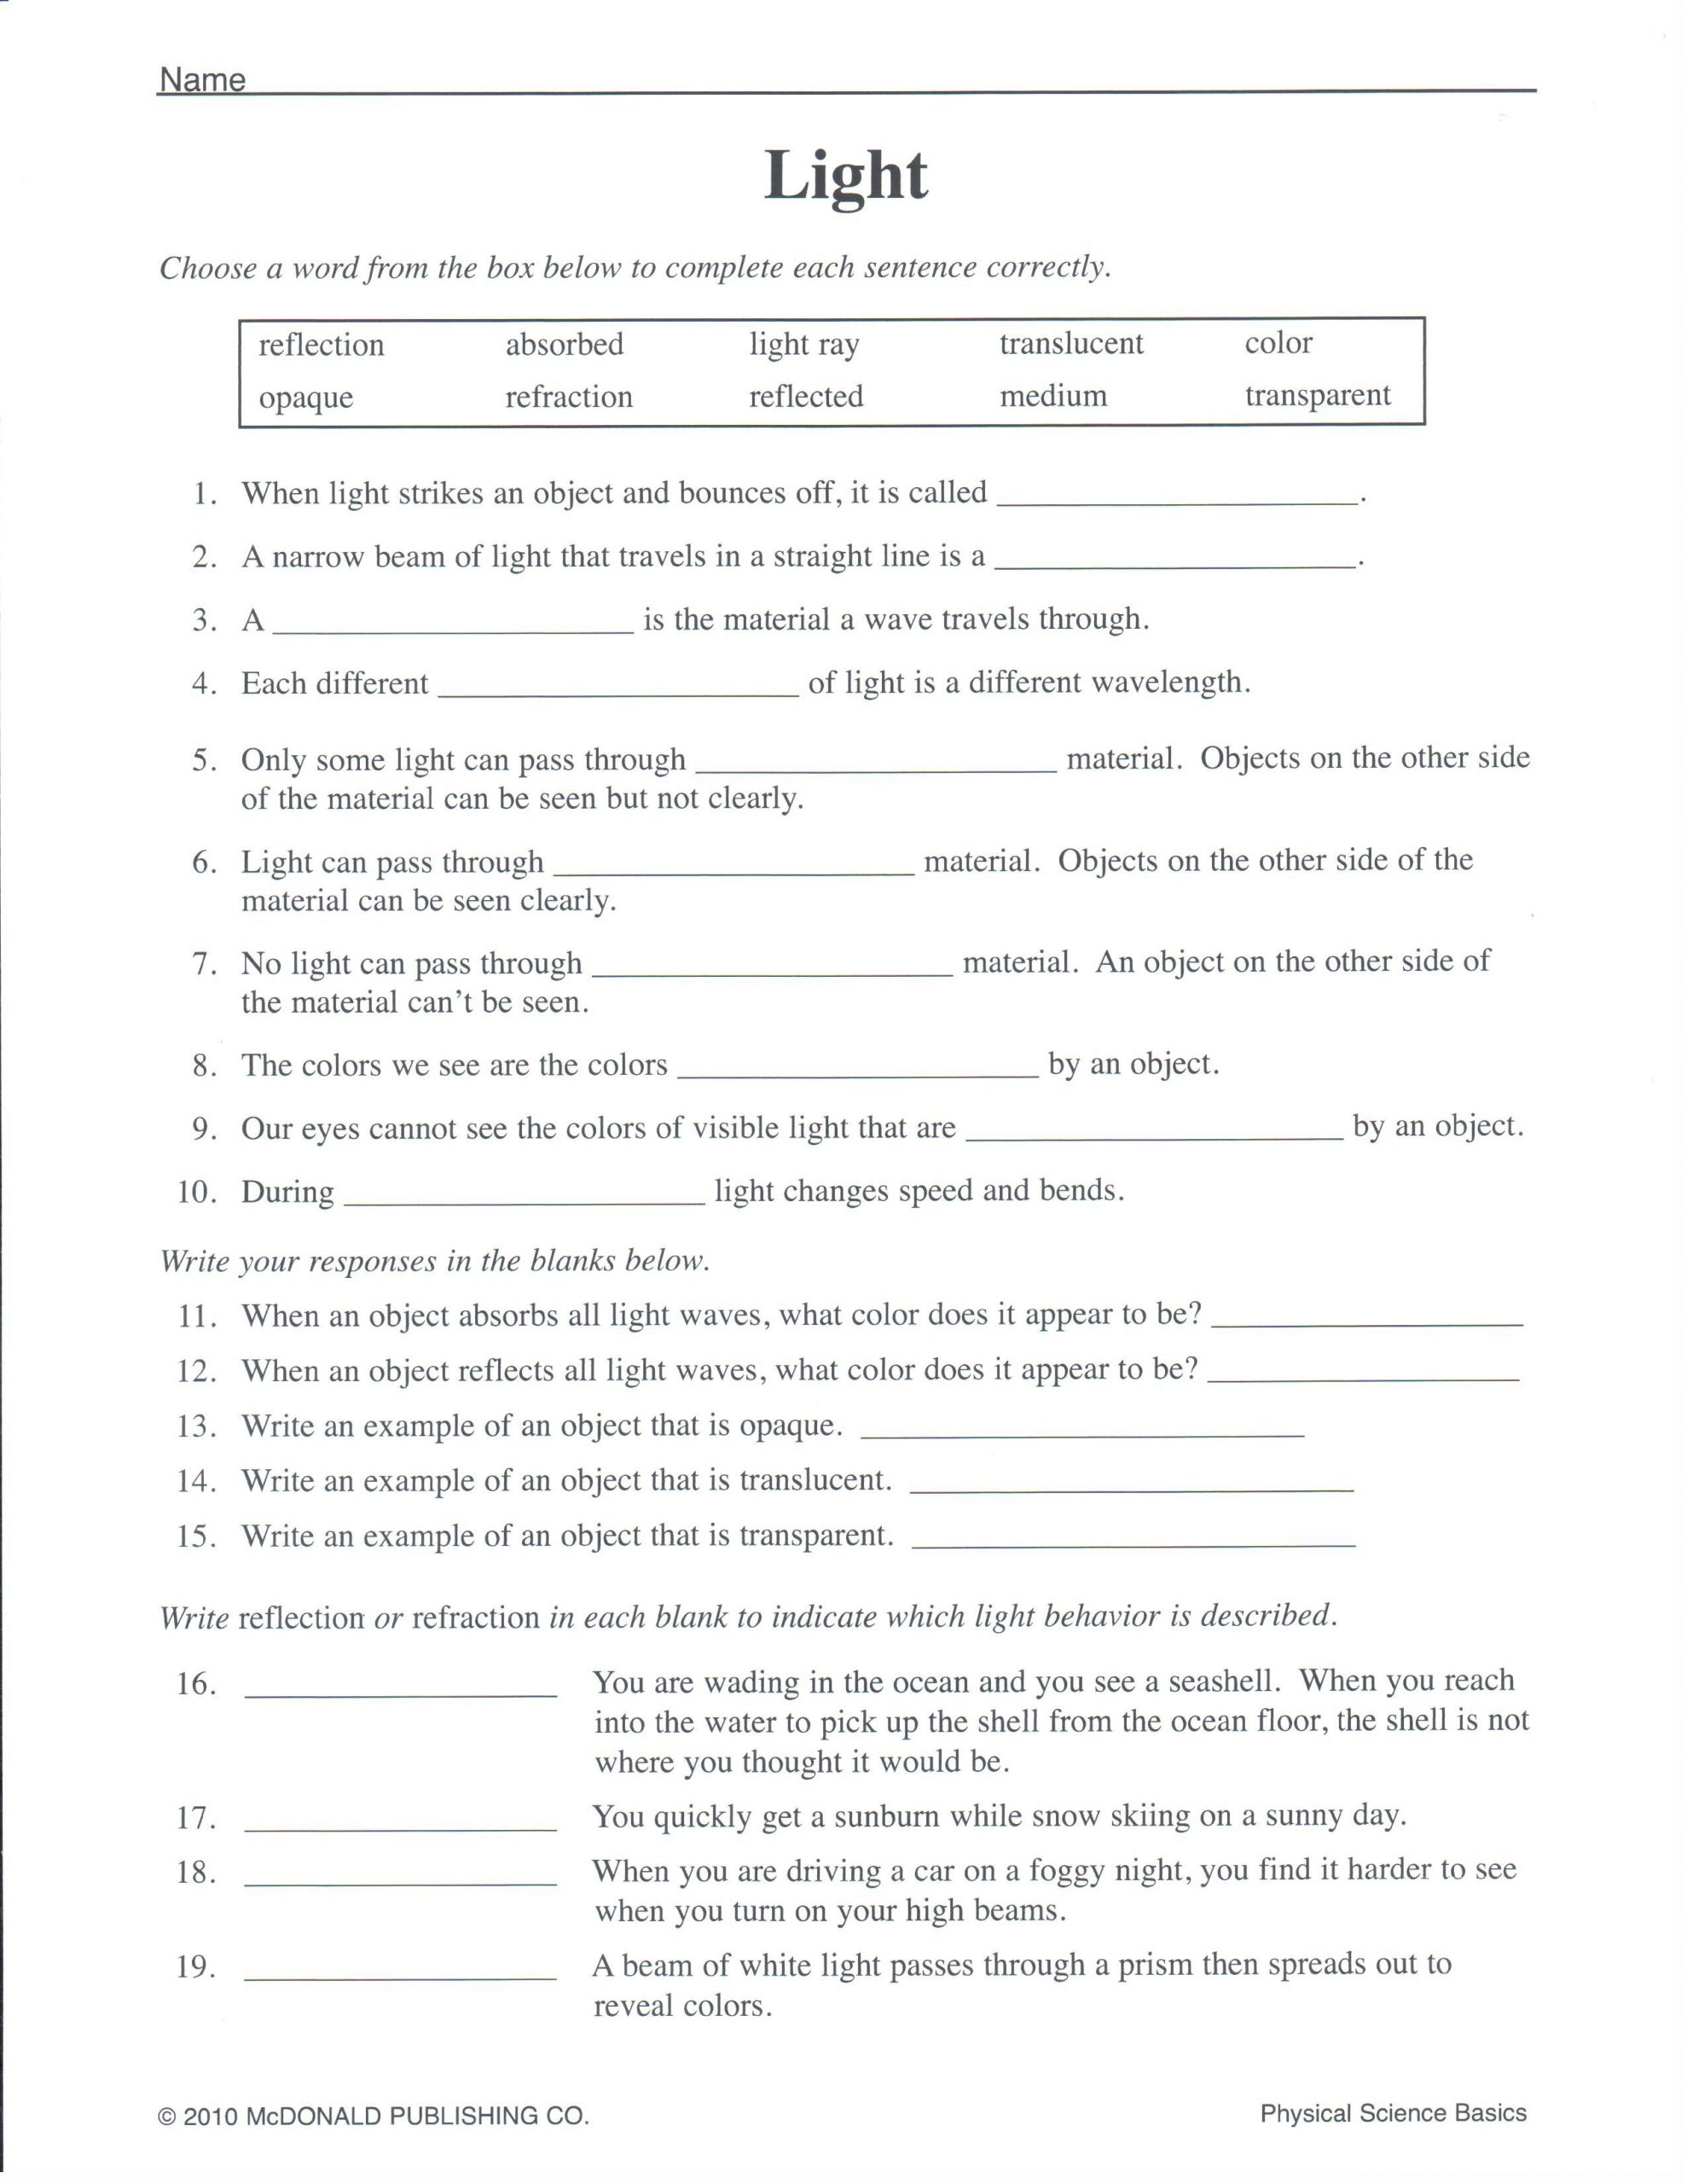 Electromagnetic Spectrum Worksheet High School Physical Science March 2013